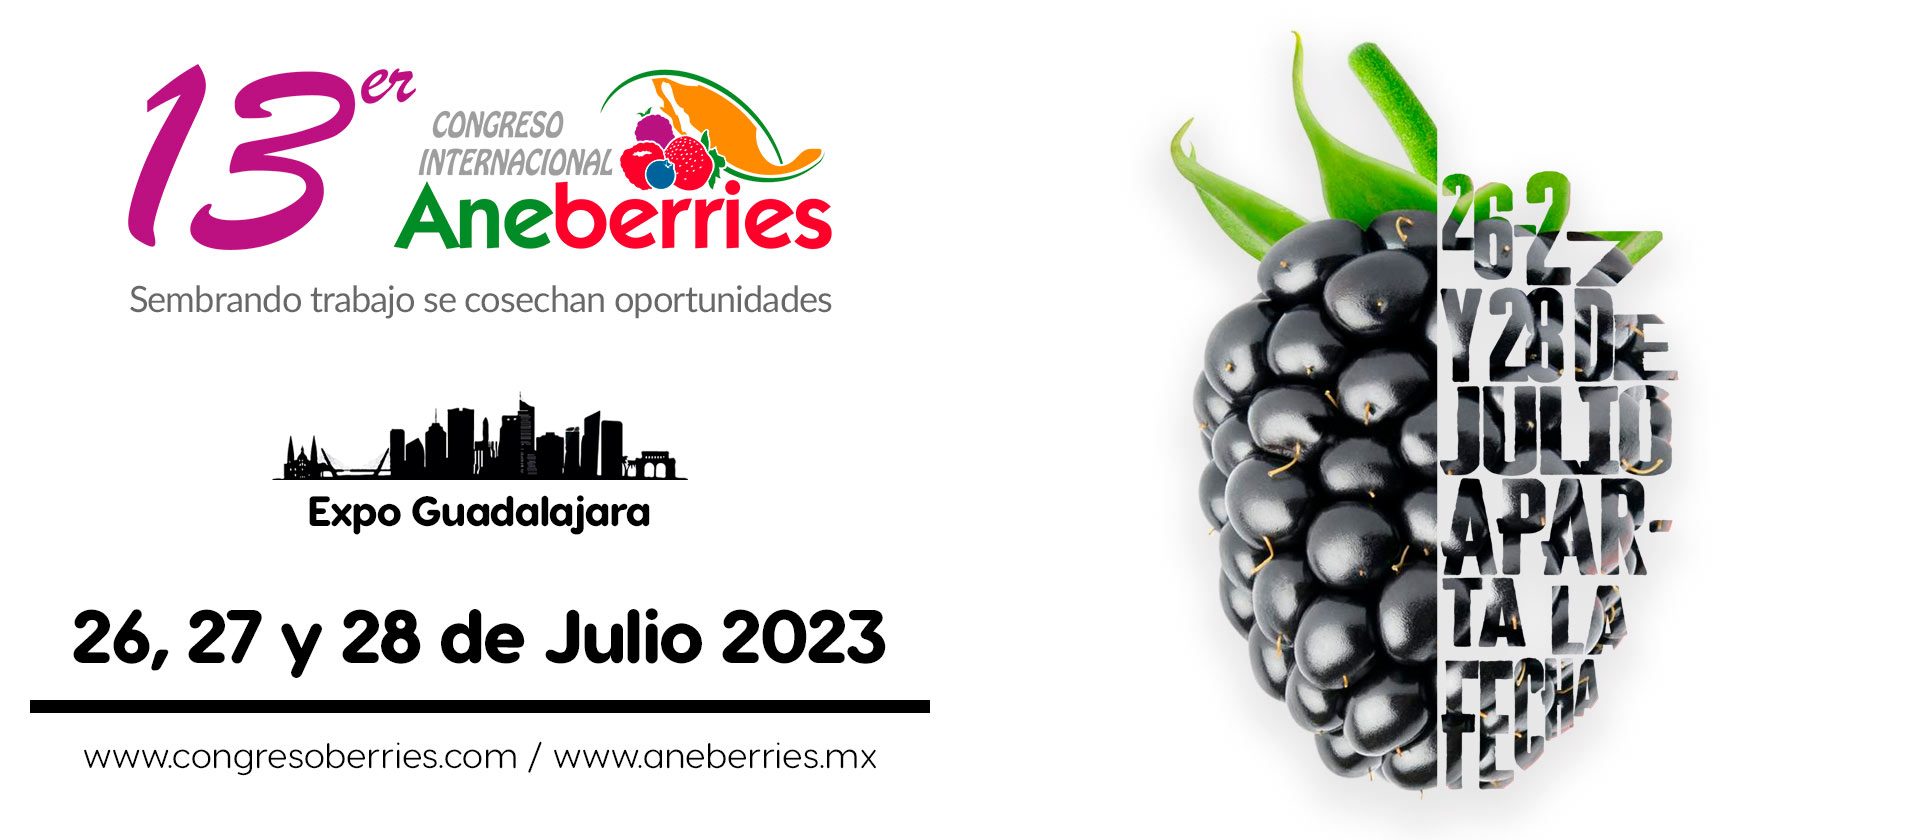 13th International Aneberries Congress set for July